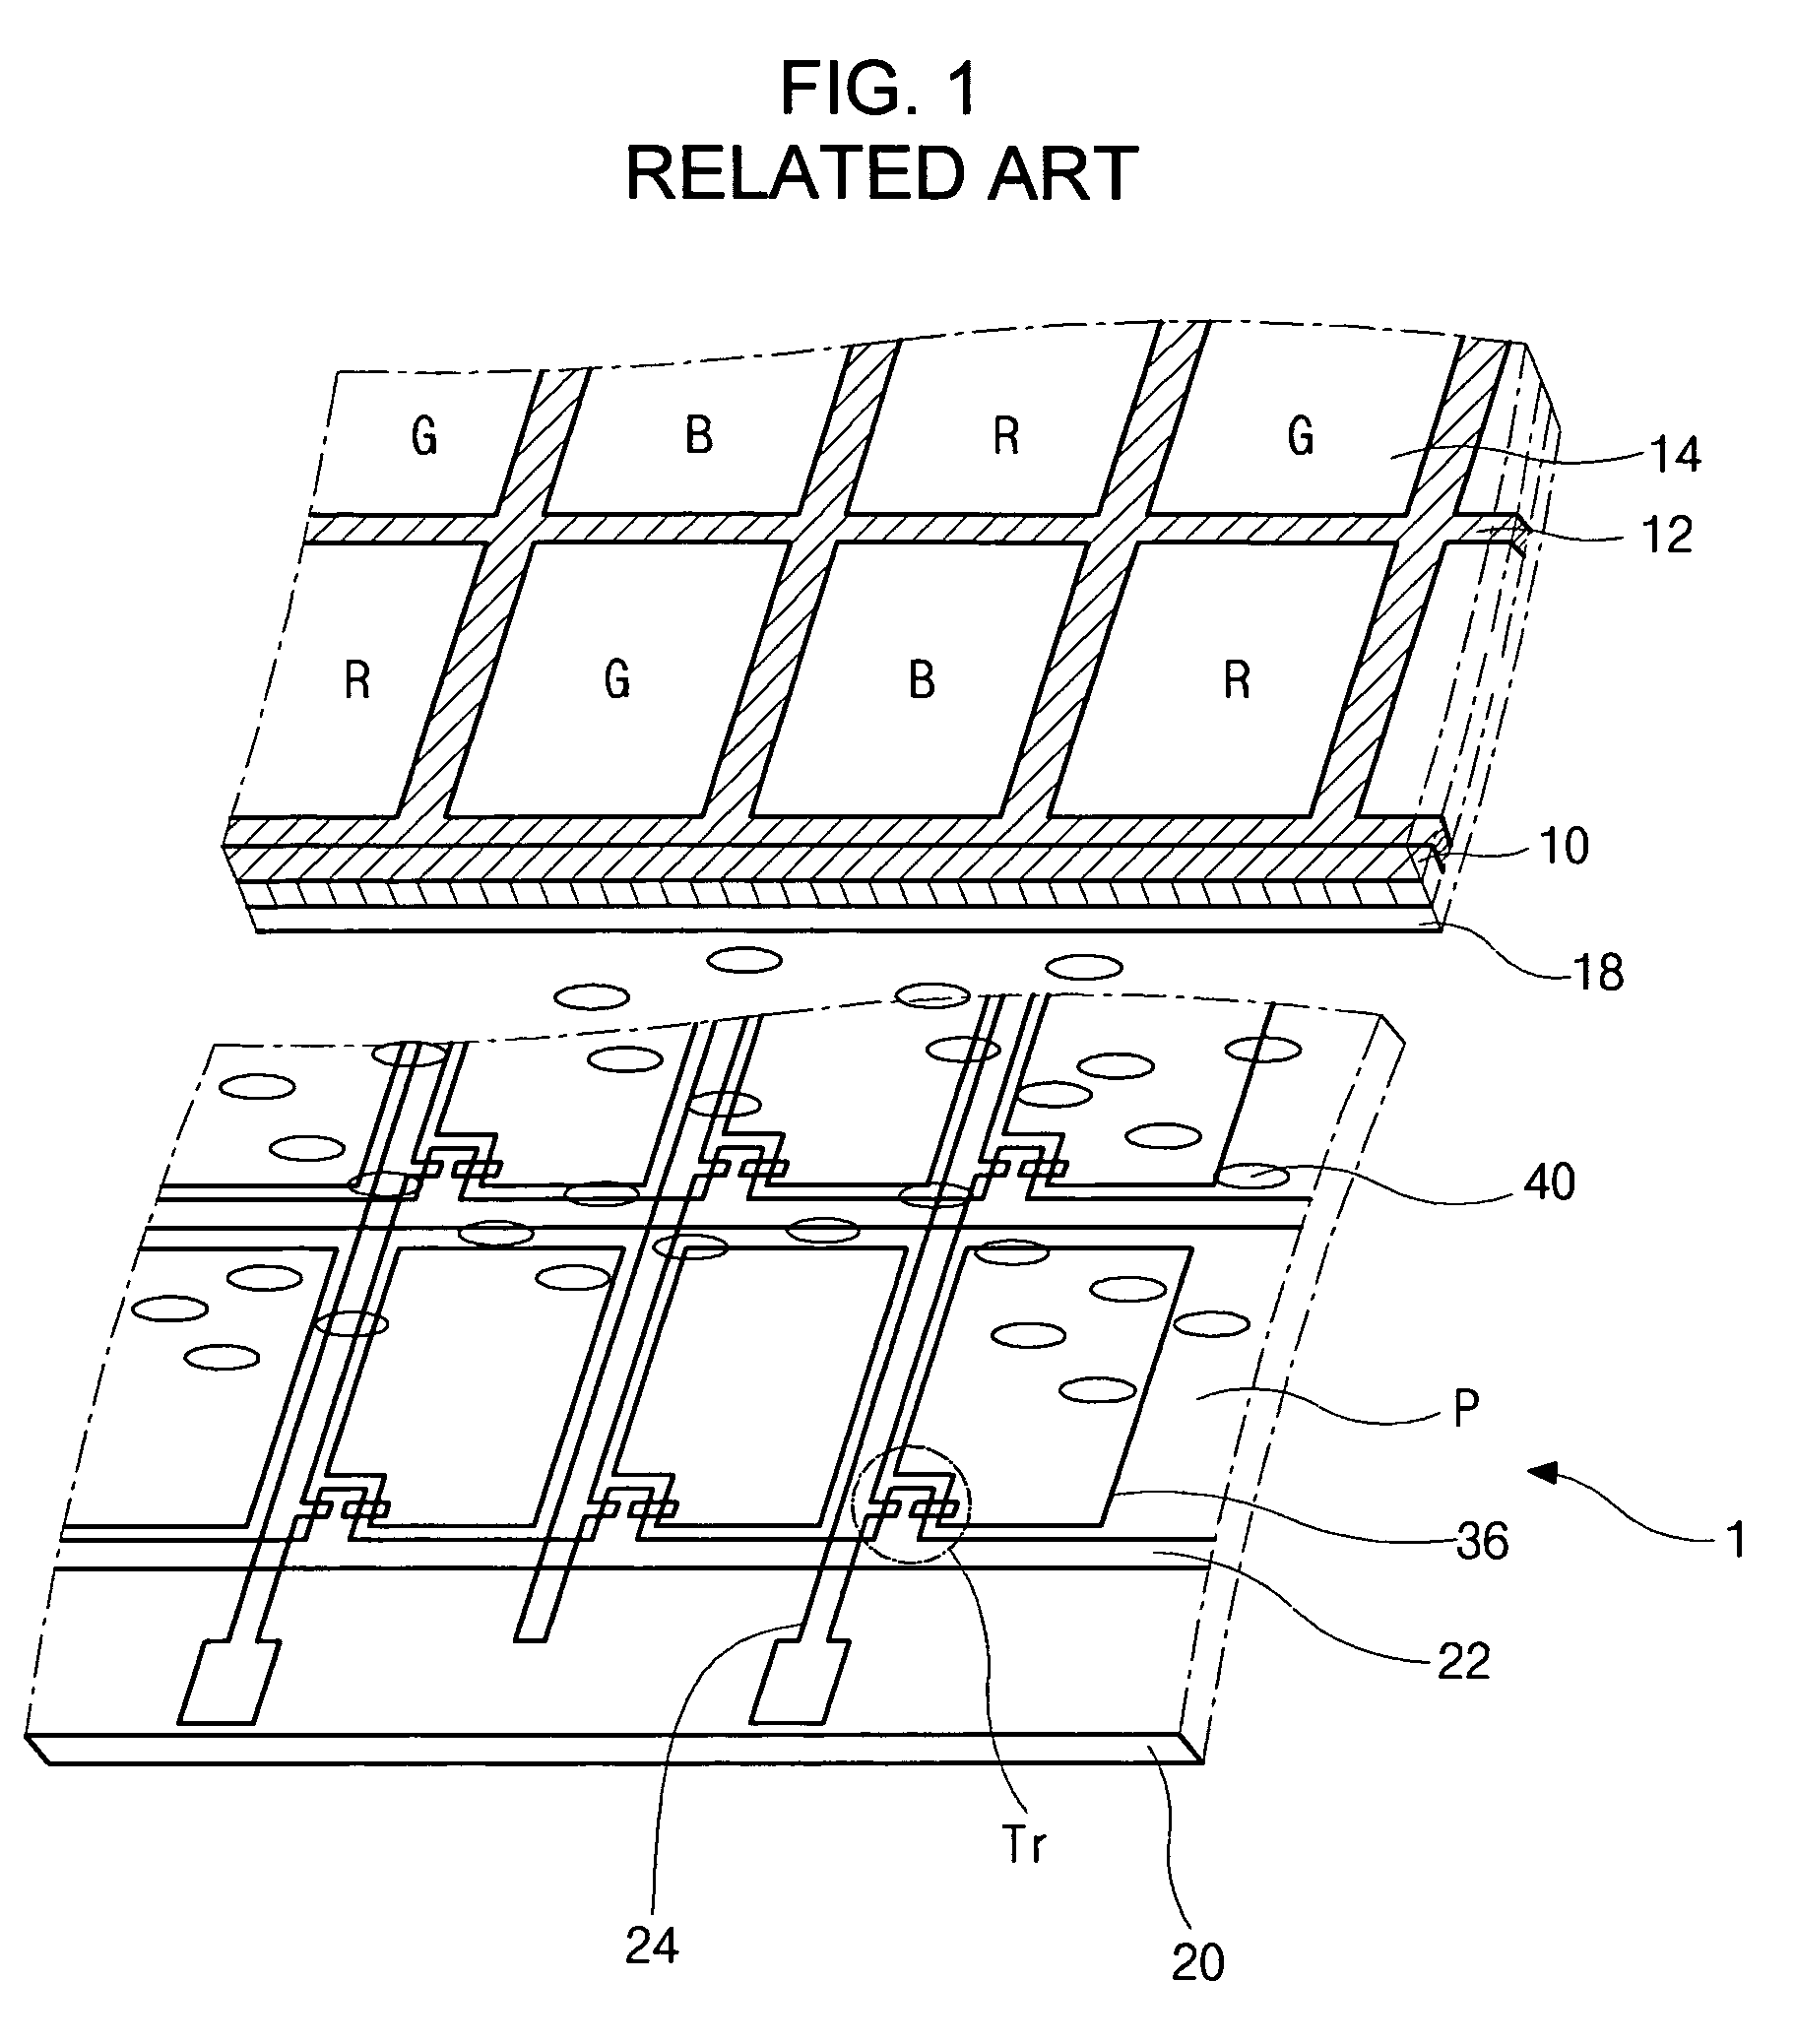 Liquid crystal display device and fabricating method for forming polarizer by depositing, drying and curing lyotropic liquid crystal on color filter pattern